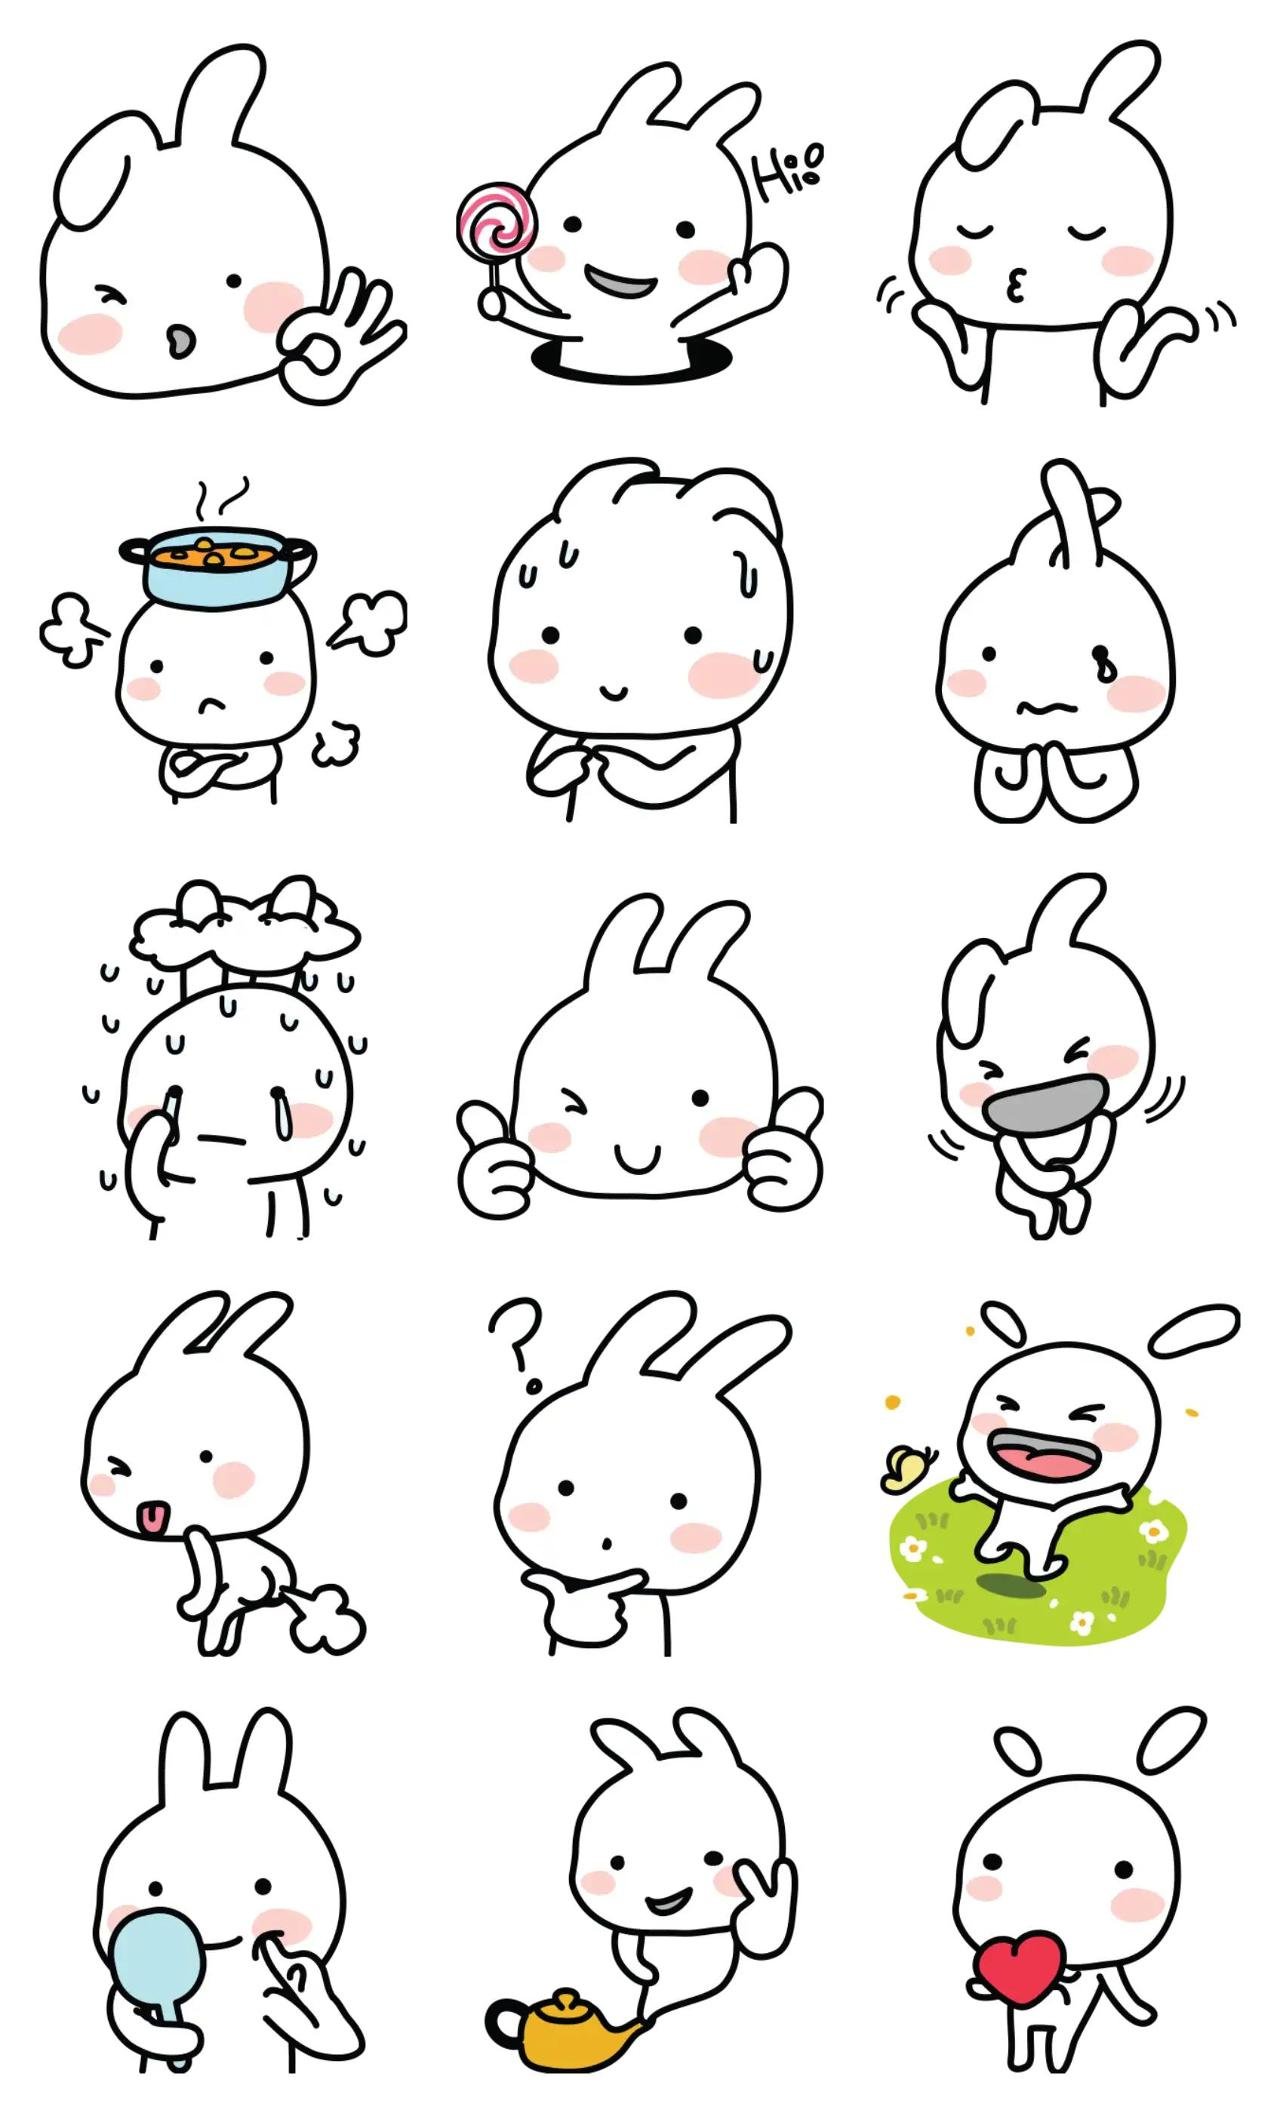 toto 1 Animals,Etc. sticker pack for Whatsapp, Telegram, Signal, and others chatting and message apps